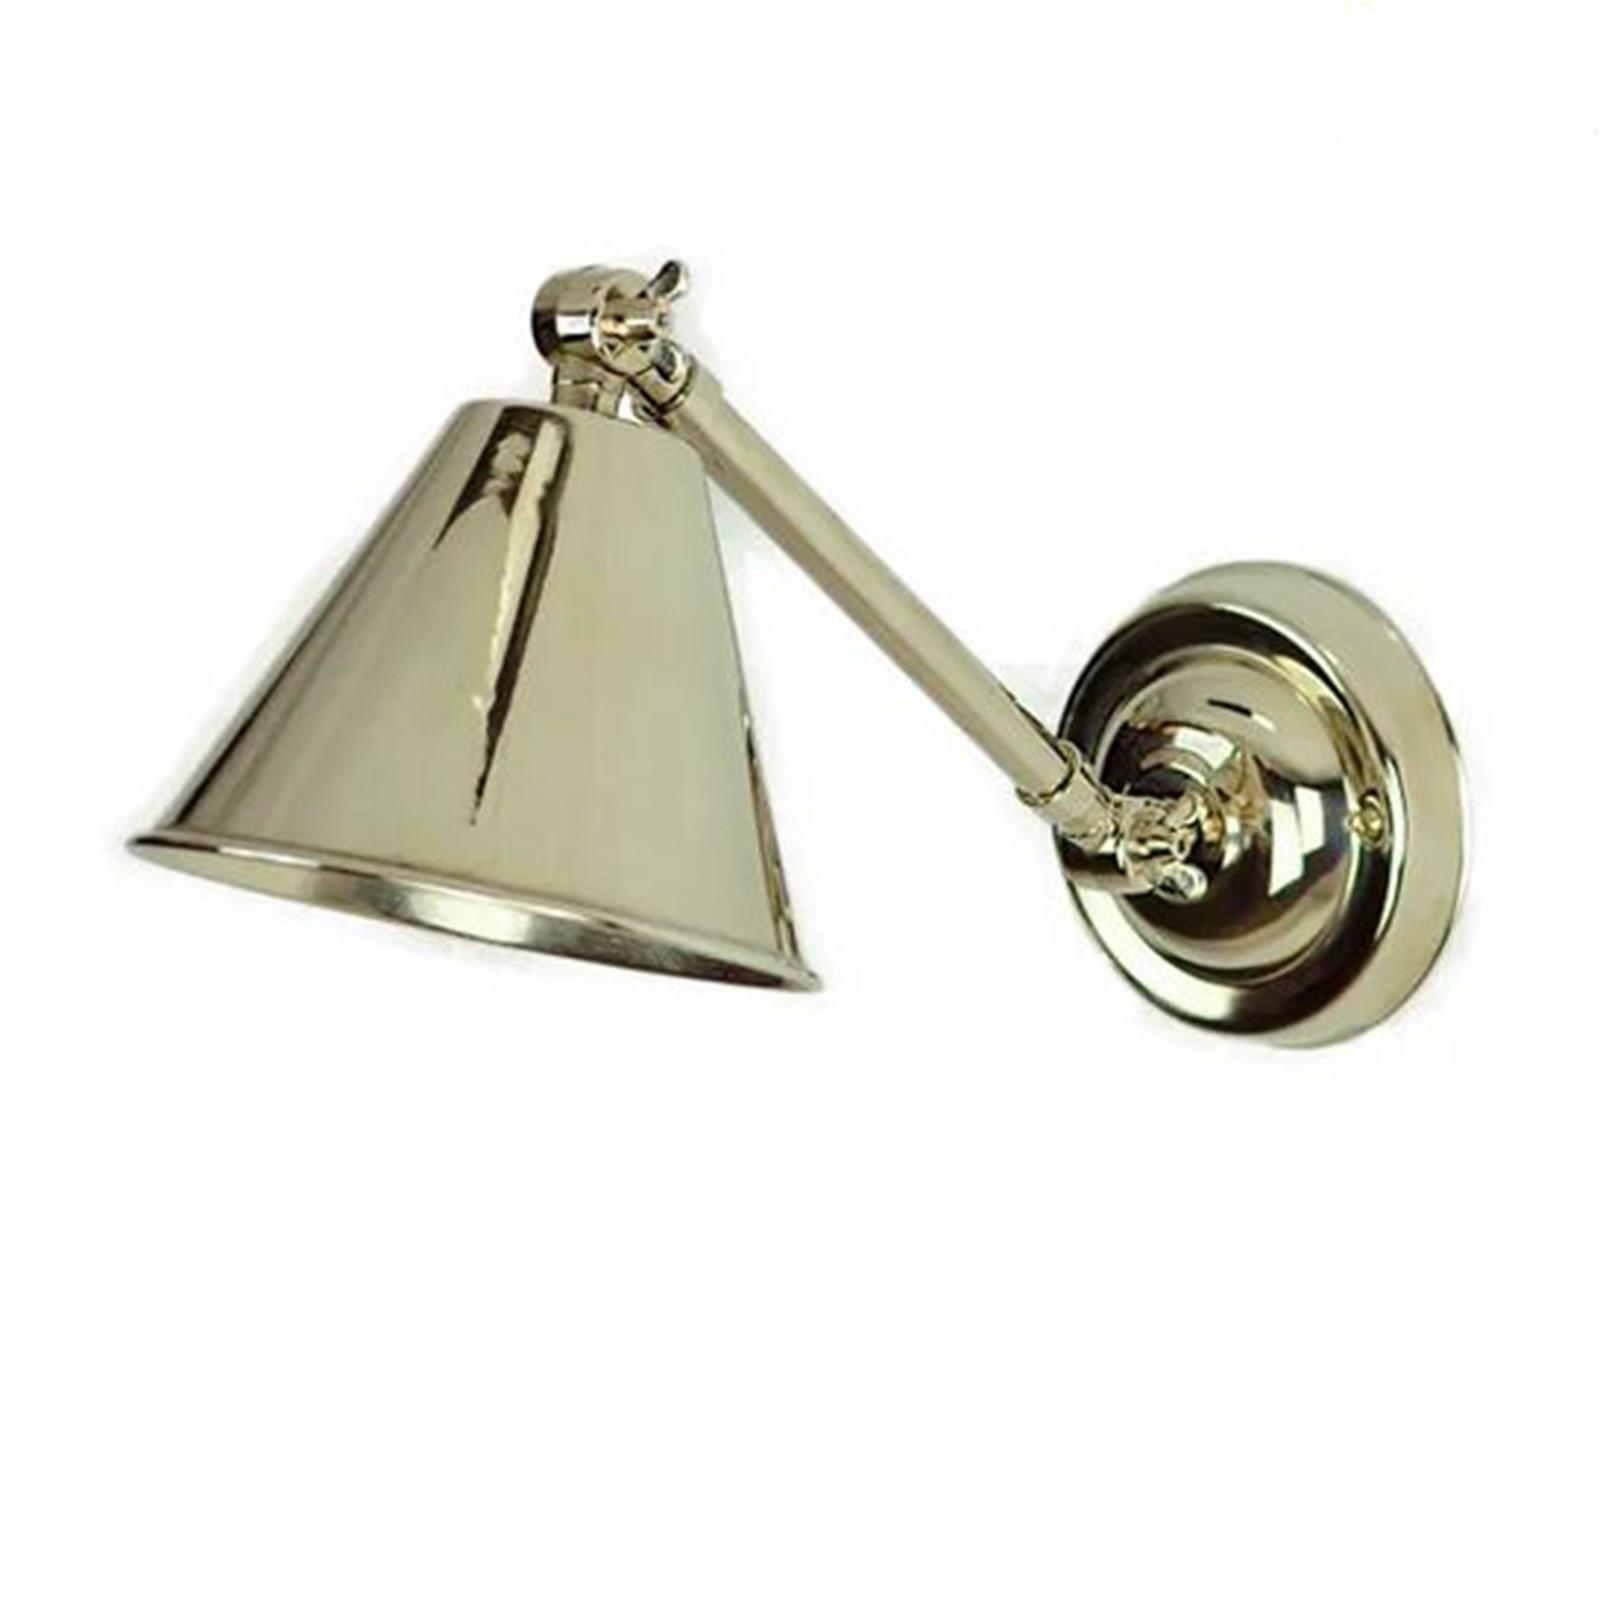 DOUBLE ADJUSTABLE ARM Wall Light - Bell Shaped in Nickel